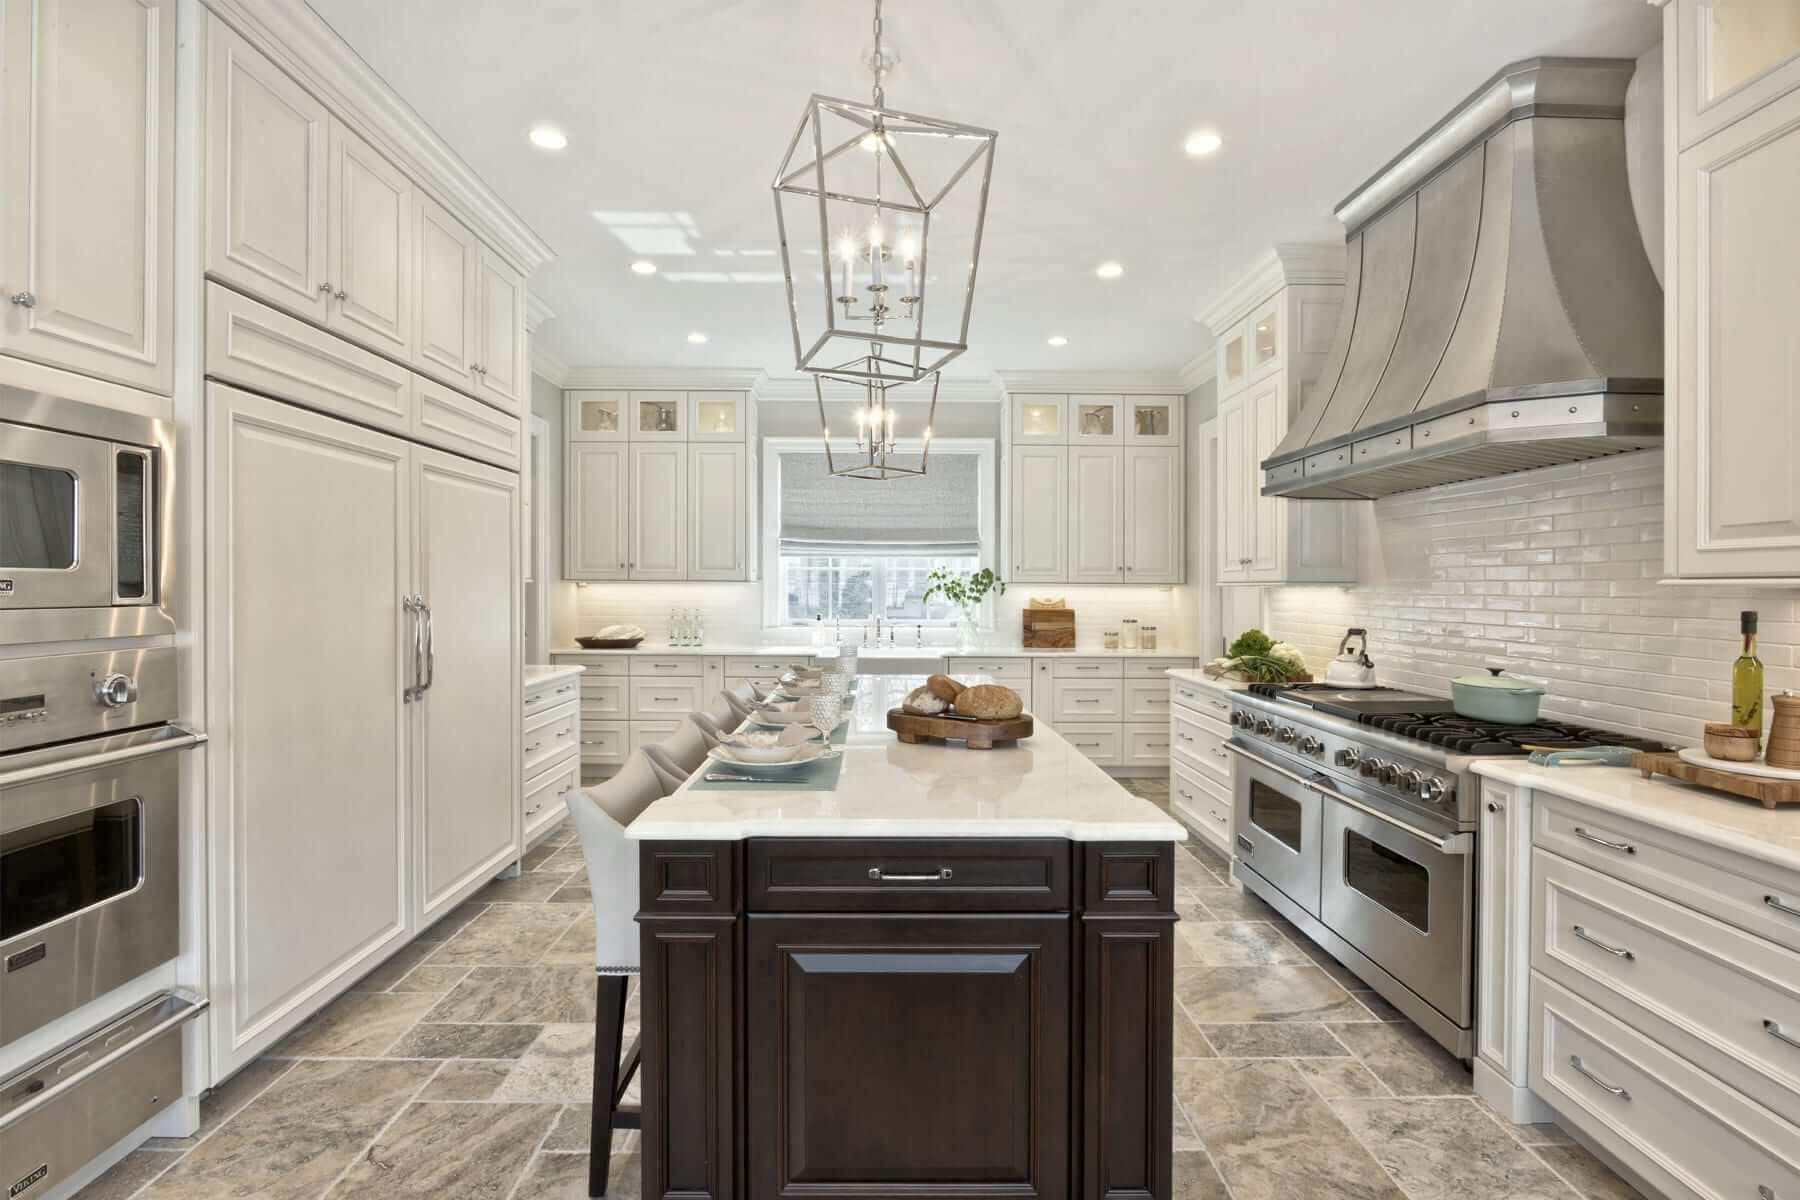 Classic kitchen features large cherry stained Bilotta island topped with Biano Rhino marble